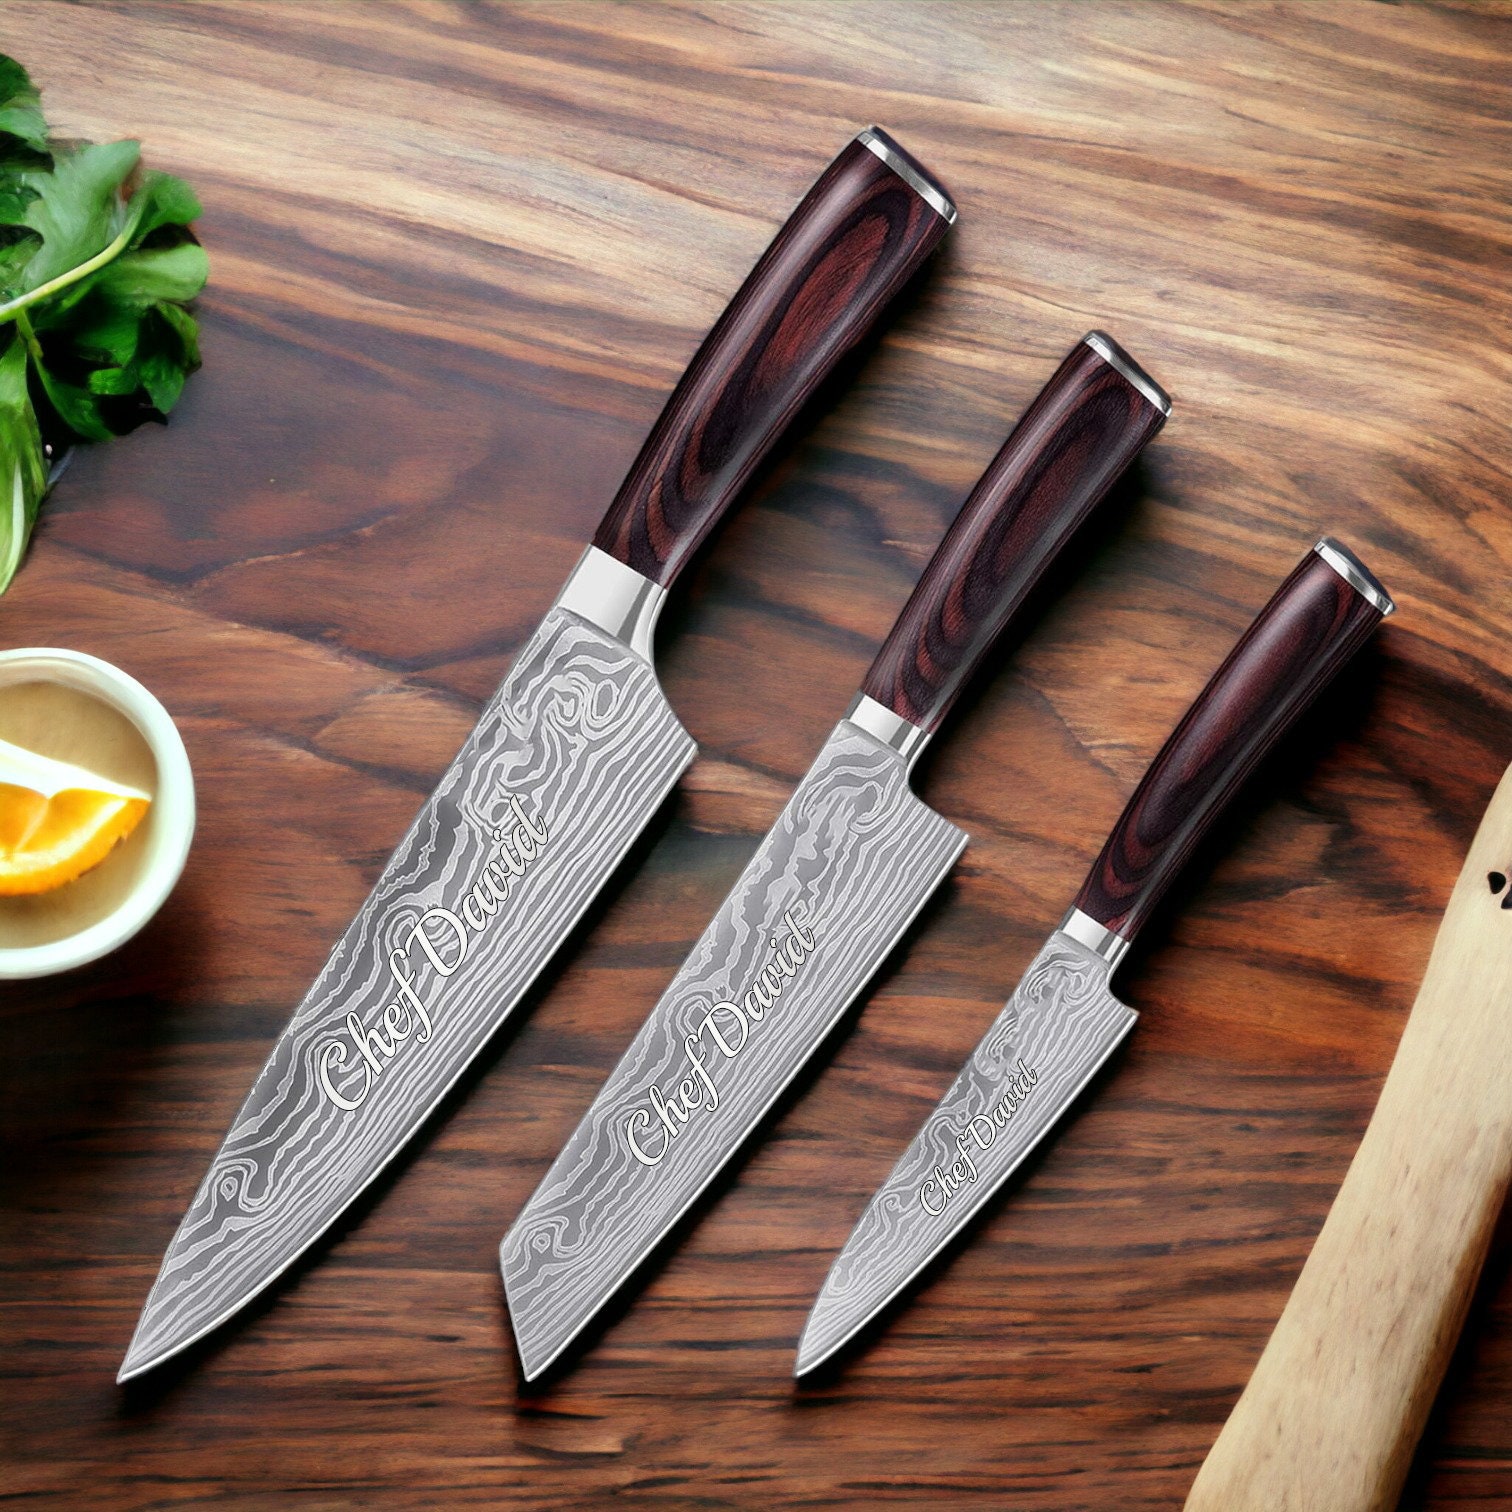 Prime Damascus Chef Knife, Sharp Kitchen Knives, Professional Meat Cutting Knife for Chefs, Best Handmade Gift (paddock and Oak Wood)